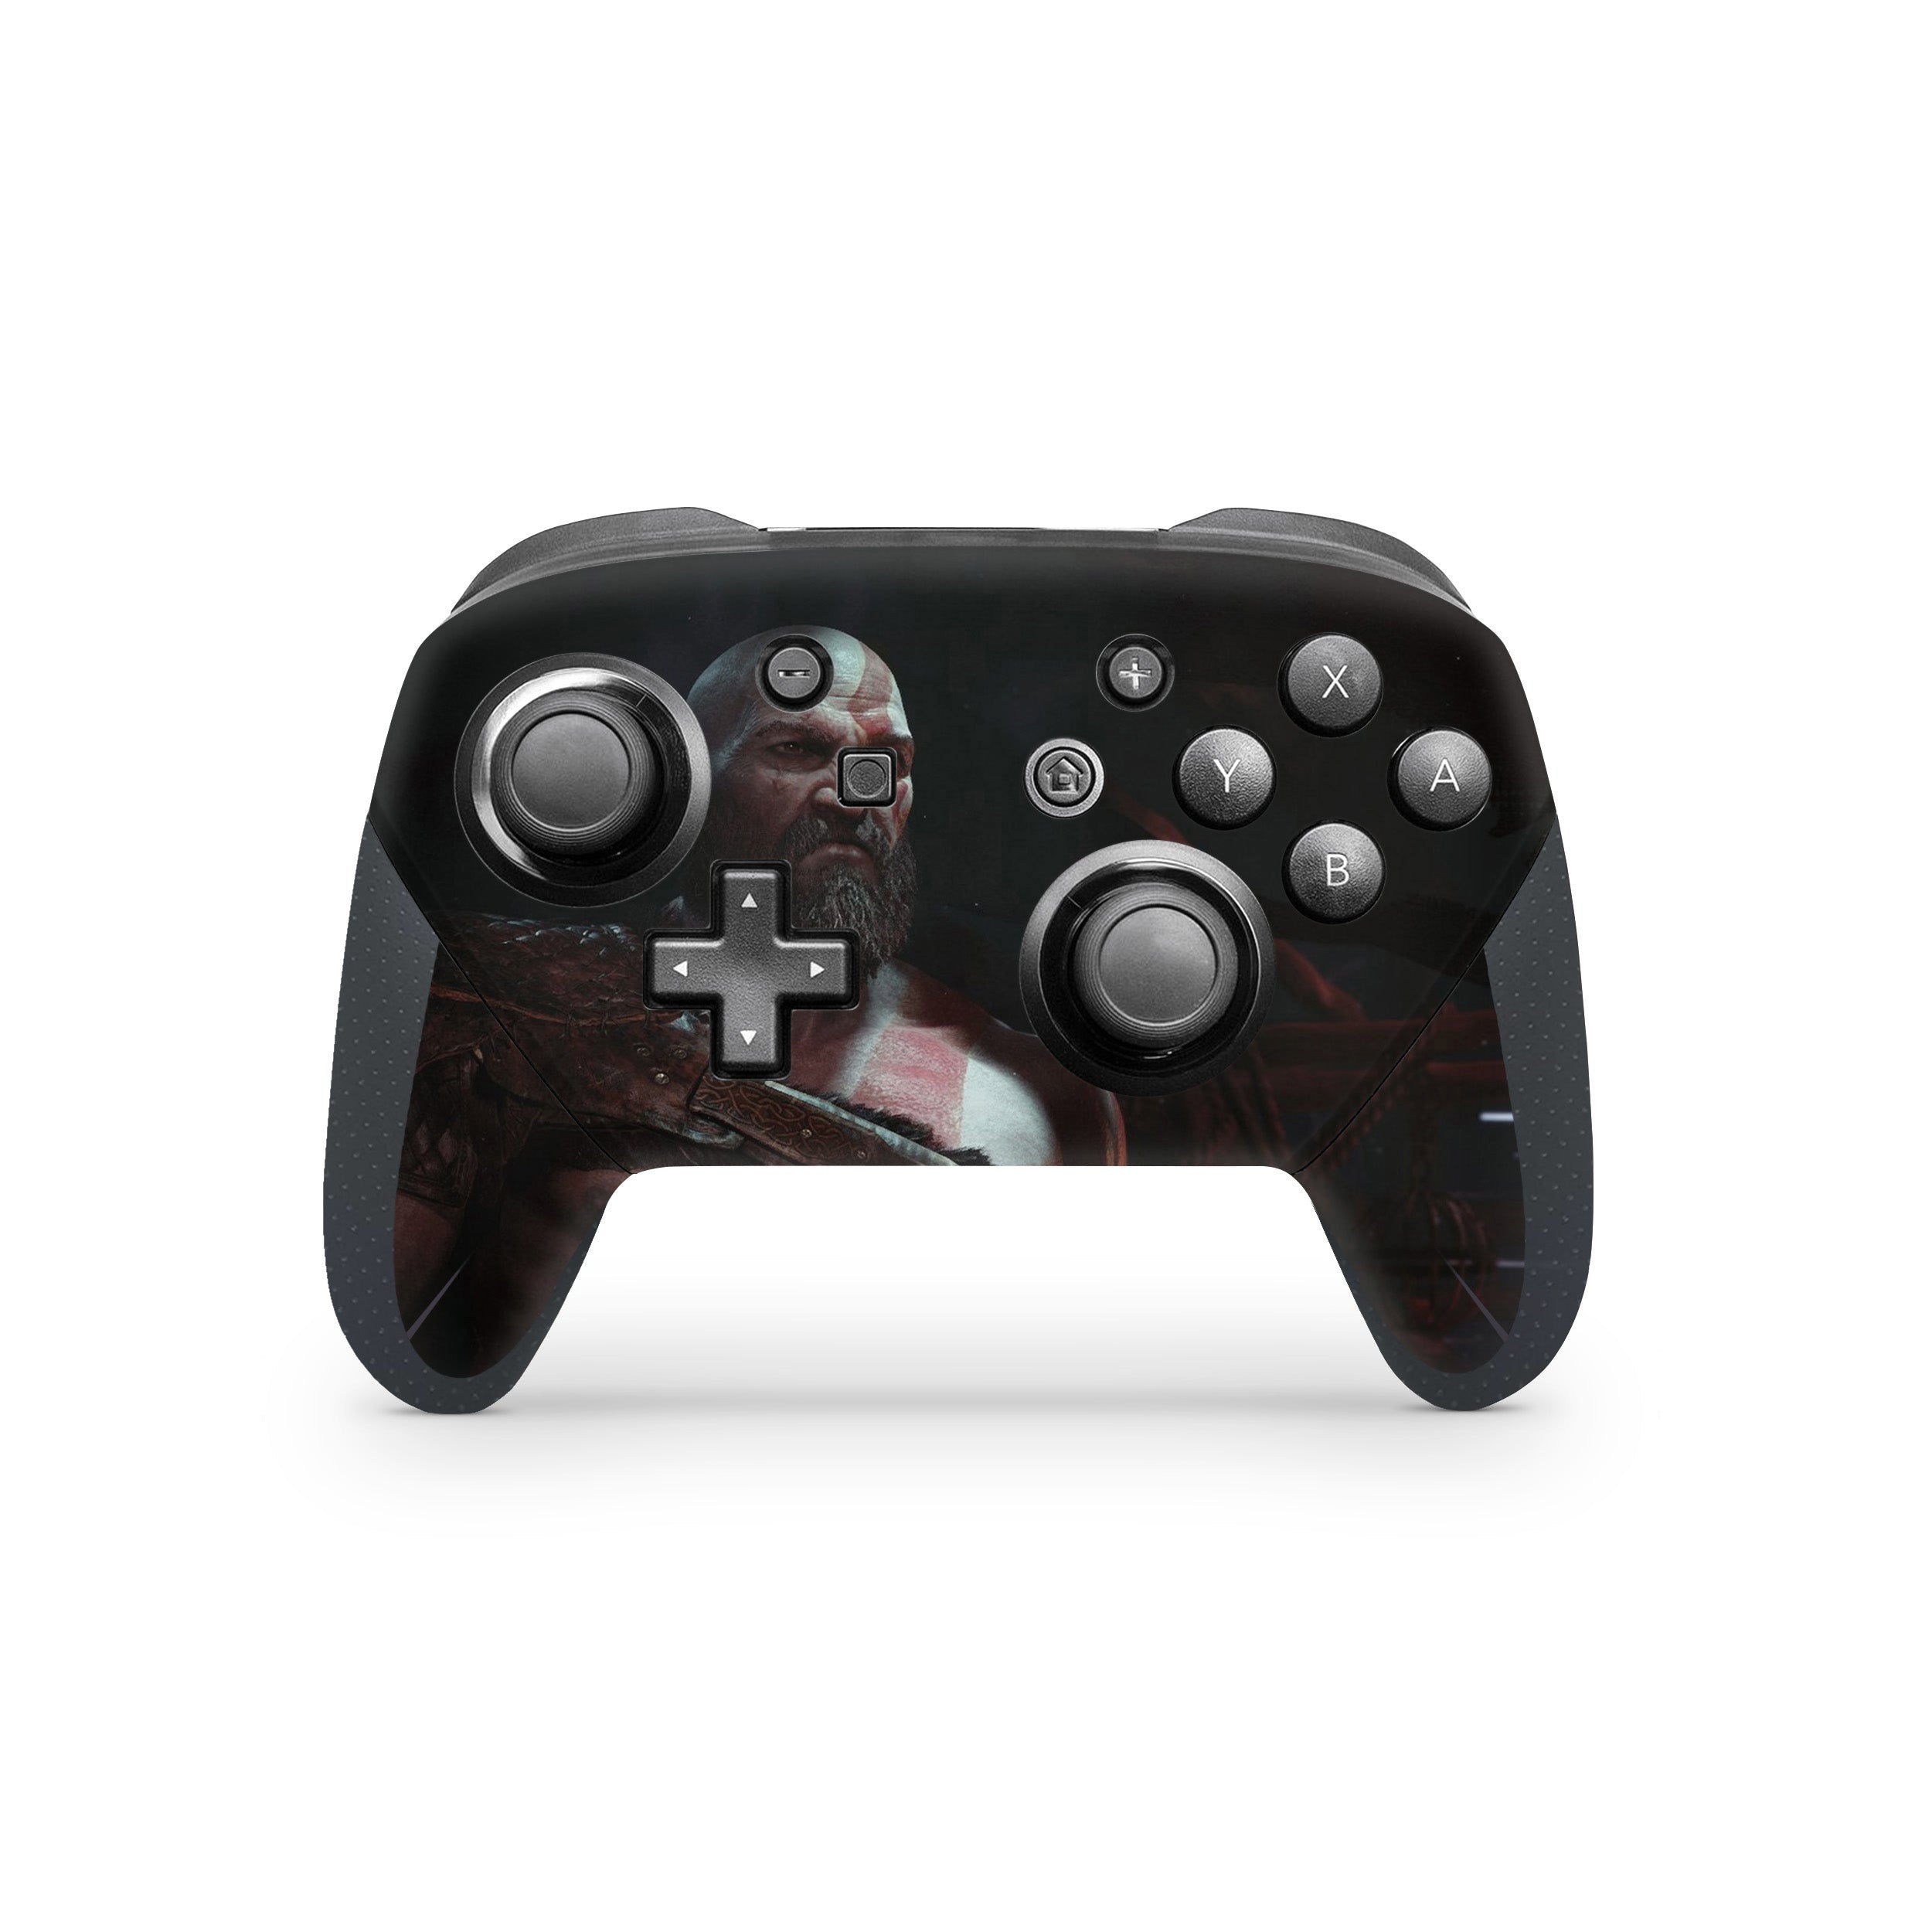 A video game skin featuring a God Of War design for the Switch Pro Controller.